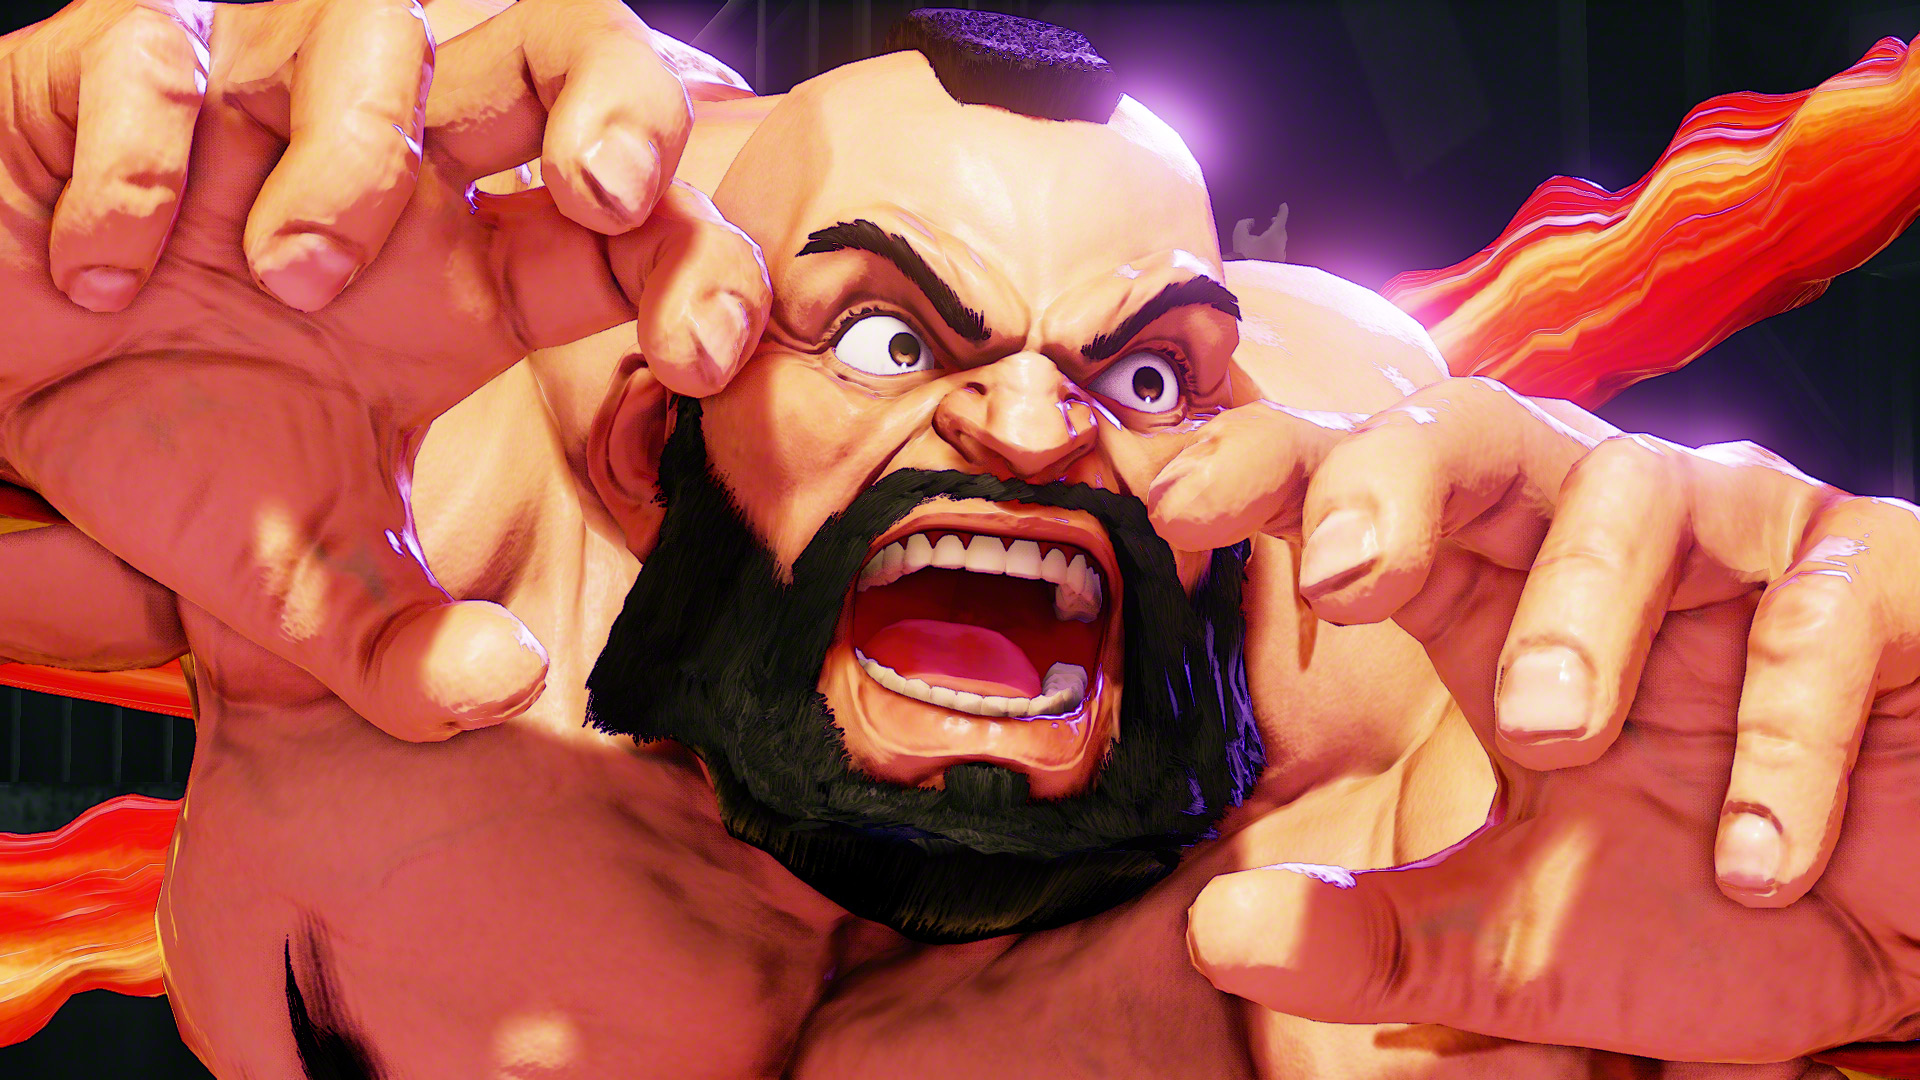 Zangief is coming back for Street Fighter 5 Polygon